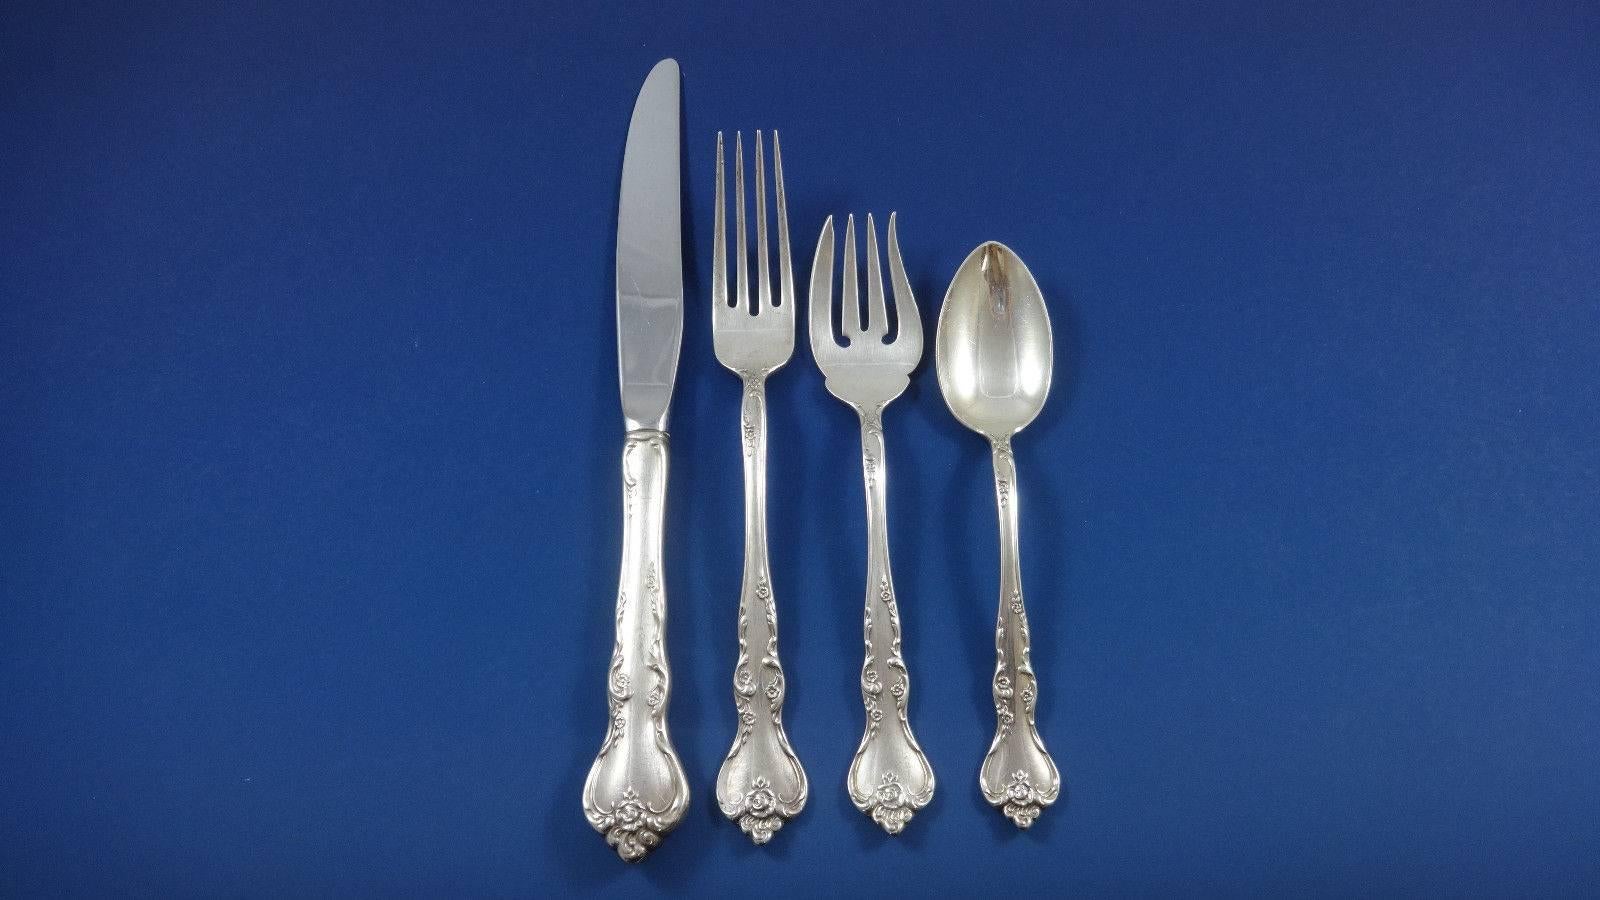 SAVANNAH BY REED & BARTON  Sterling Silver flatware set - 32 pieces.This set includes: 

8 KNIVES, 9 1/8